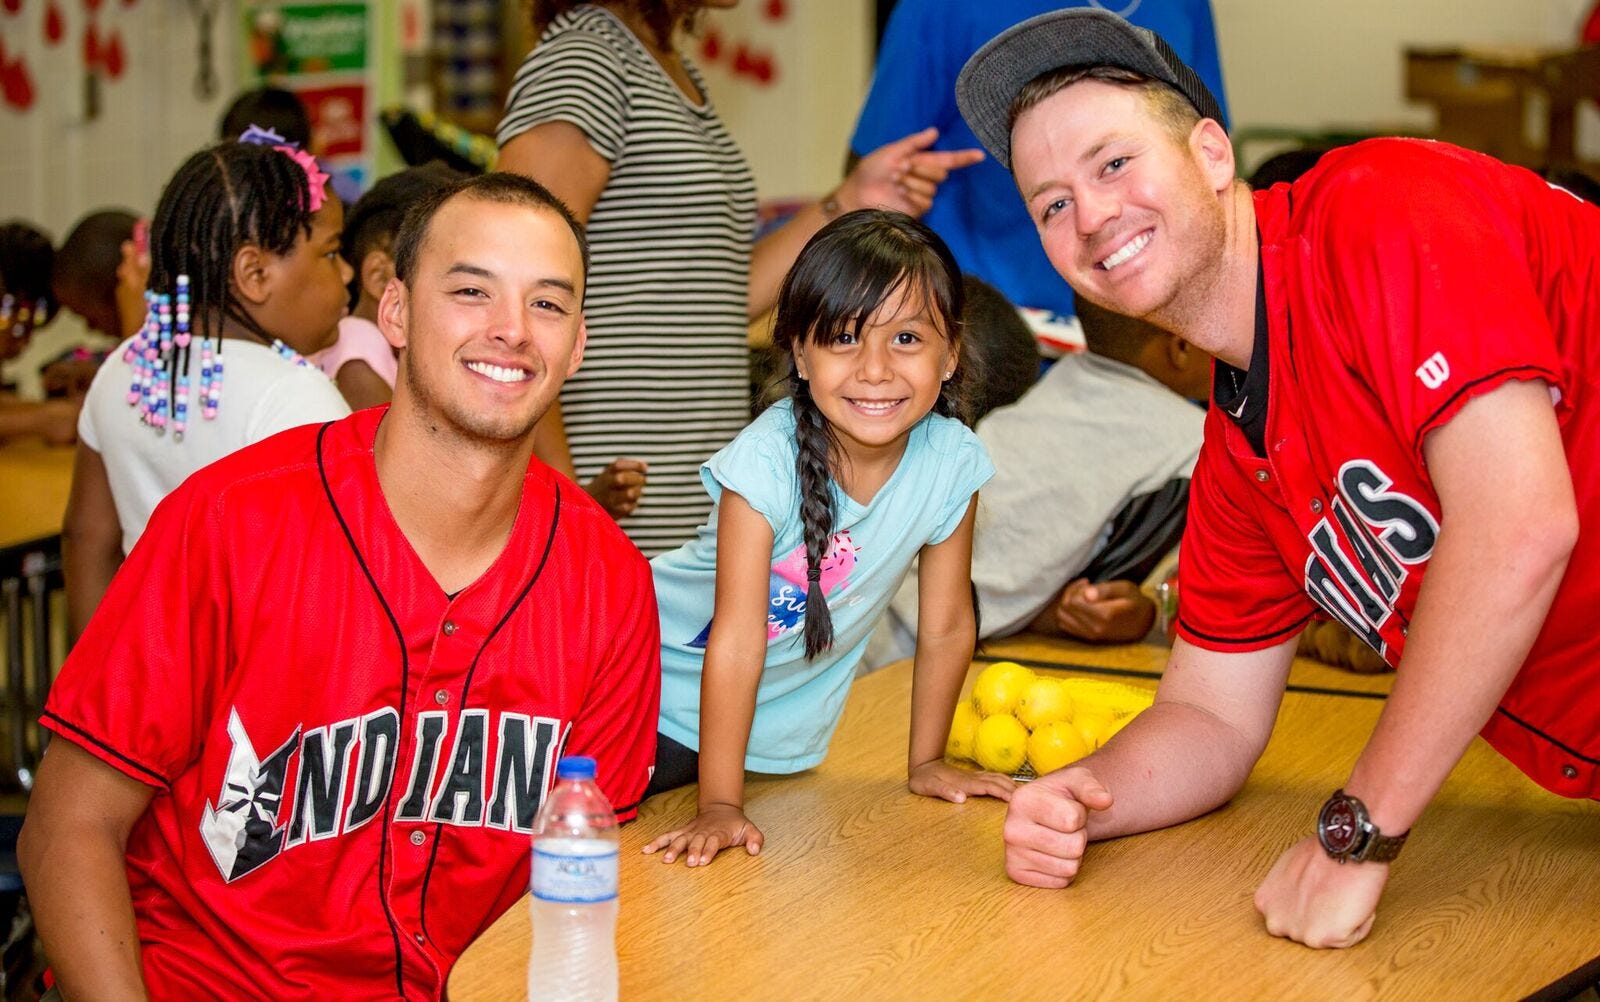 Indianapolis Indians Report Record Year of Charitable Giving